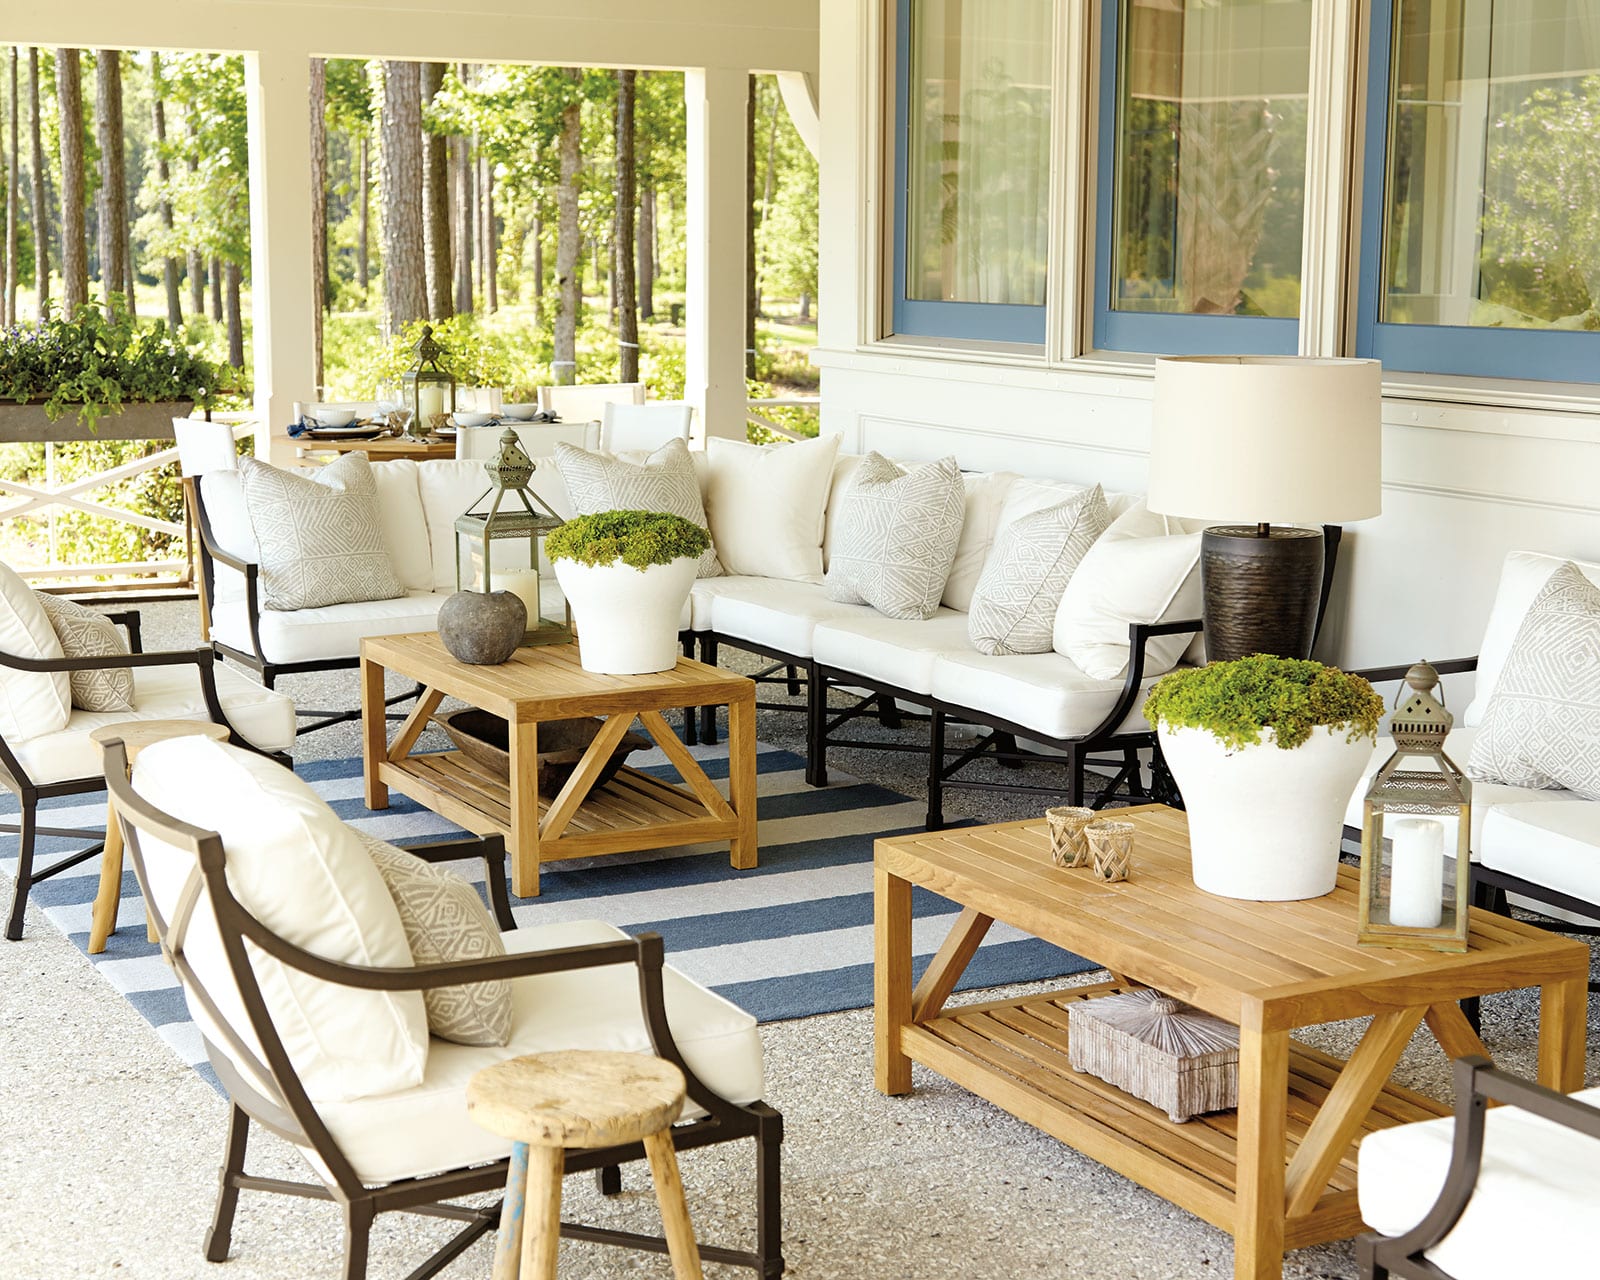 How To Shrink Wrap Patio Furniture